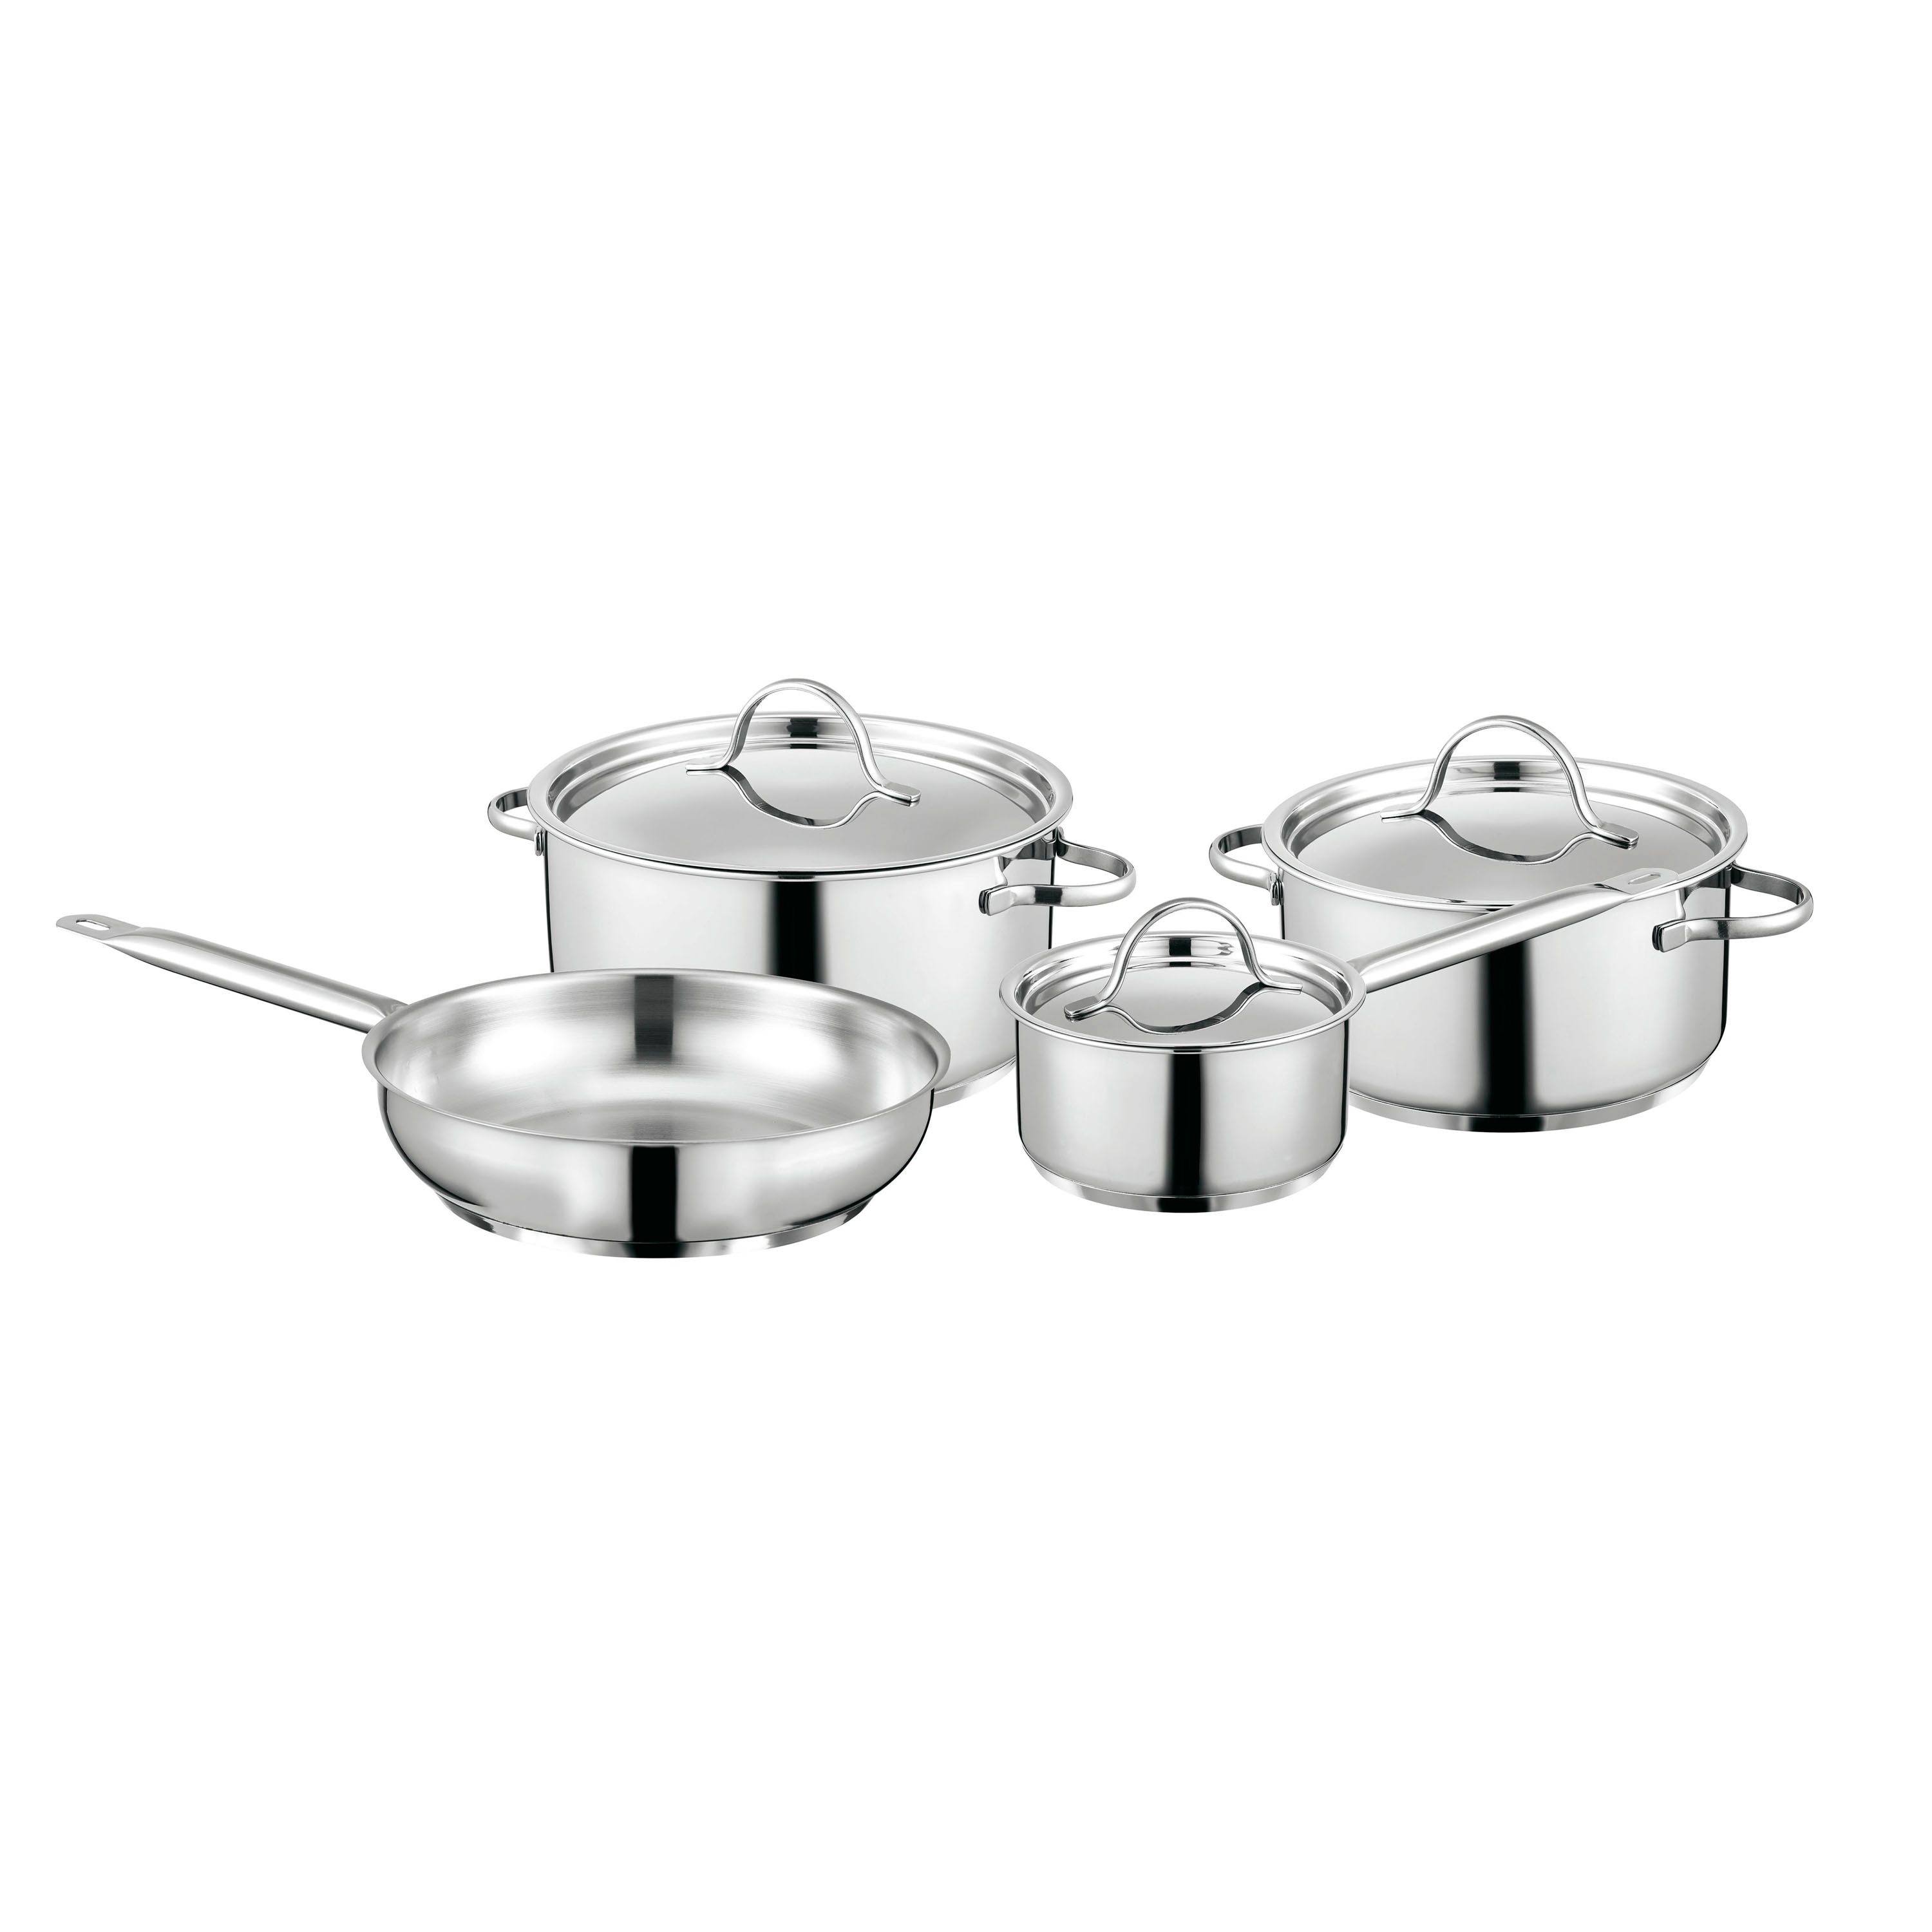 https://ak1.ostkcdn.com/images/products/is/images/direct/9b885daa0e5141ab1f15f80883060bd2ad38571a/Essentials-Comfort-7pc-18-10-SS-Cookware-Set%2C-SS-Lid.jpg